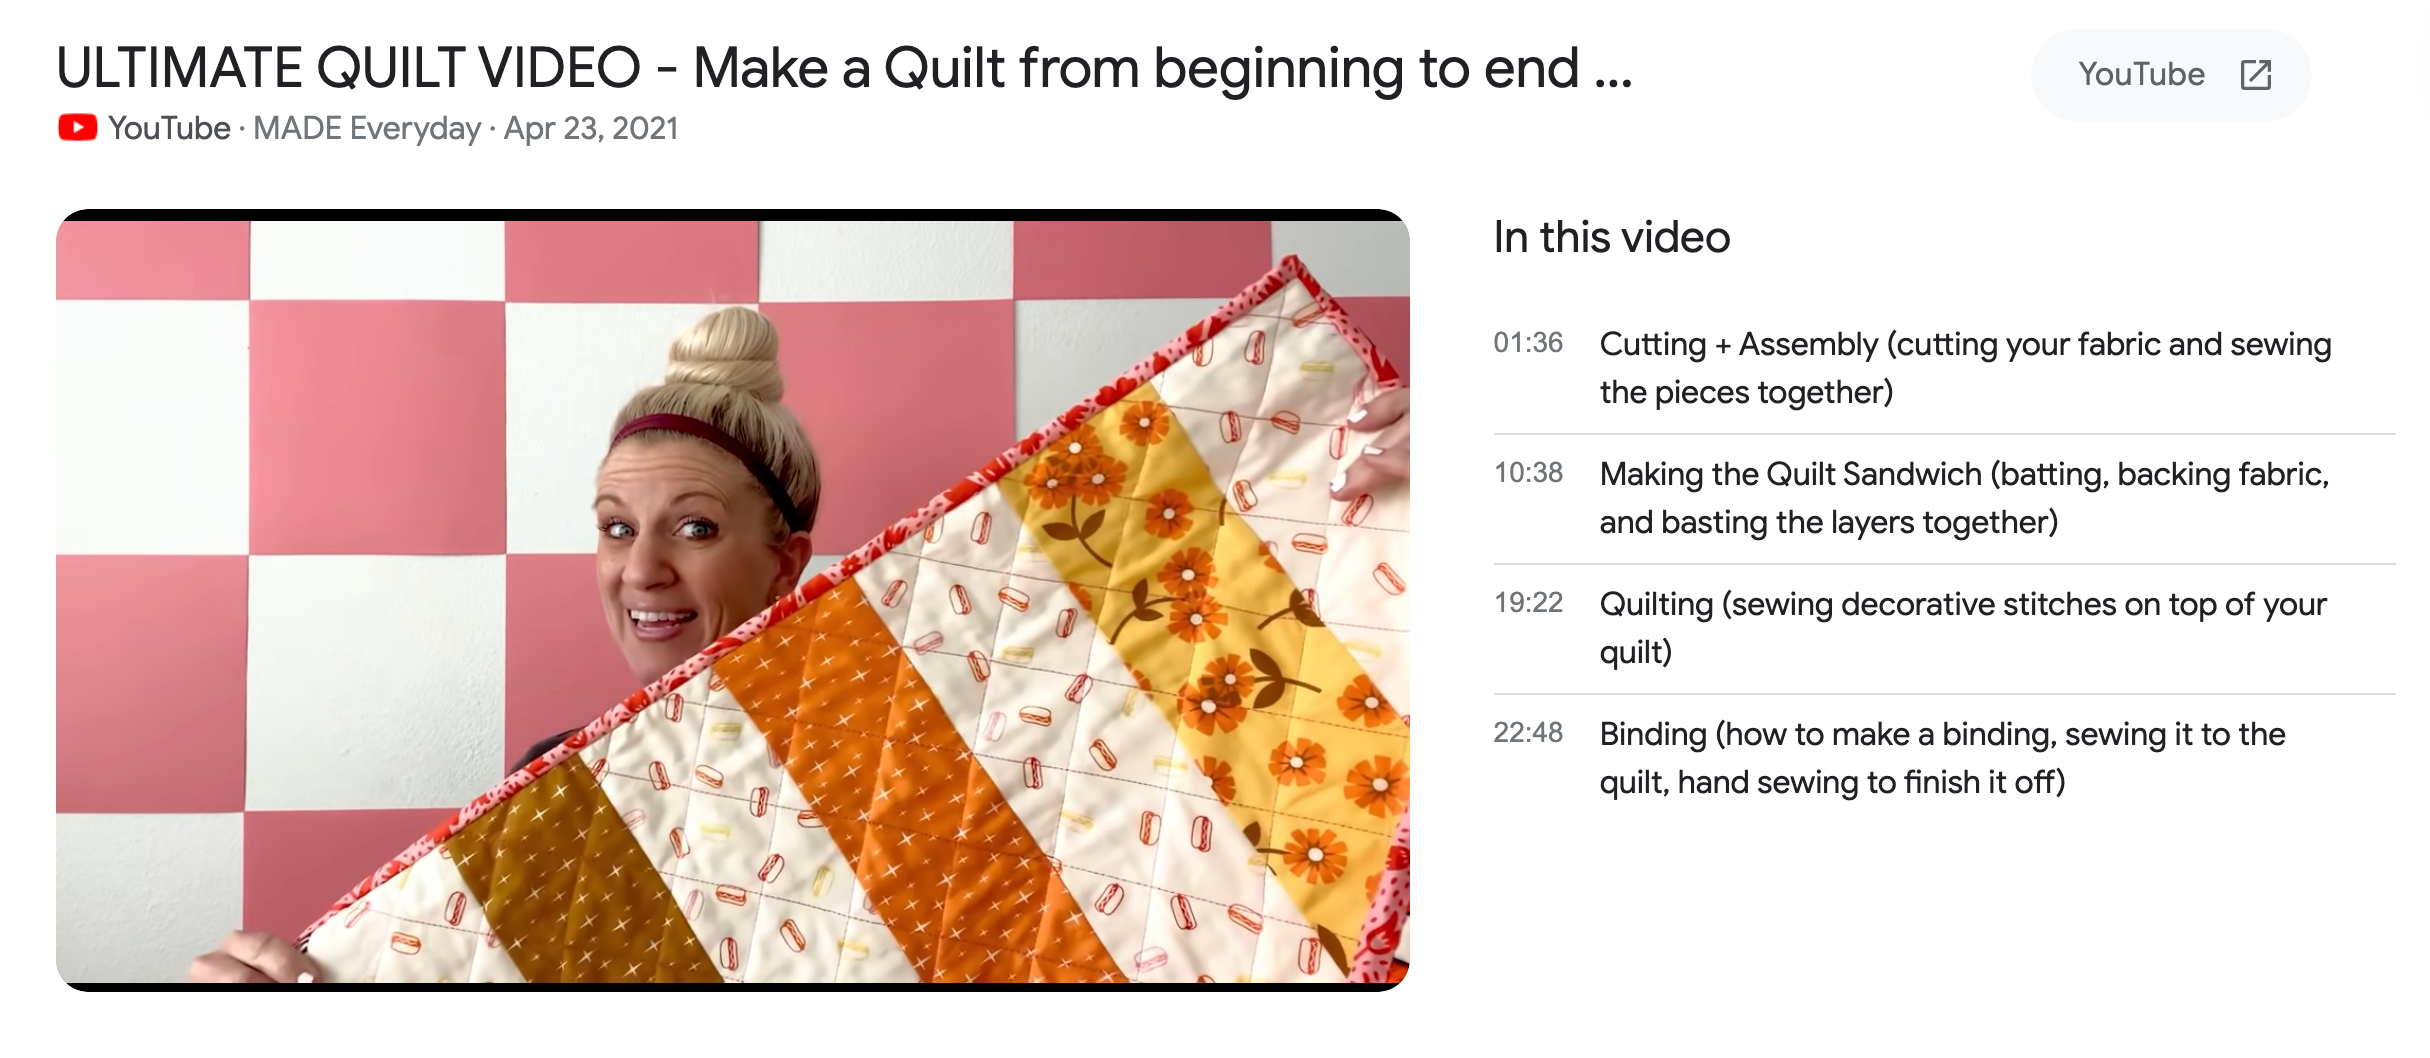 A listing for a YouTube video about how to make a quilt